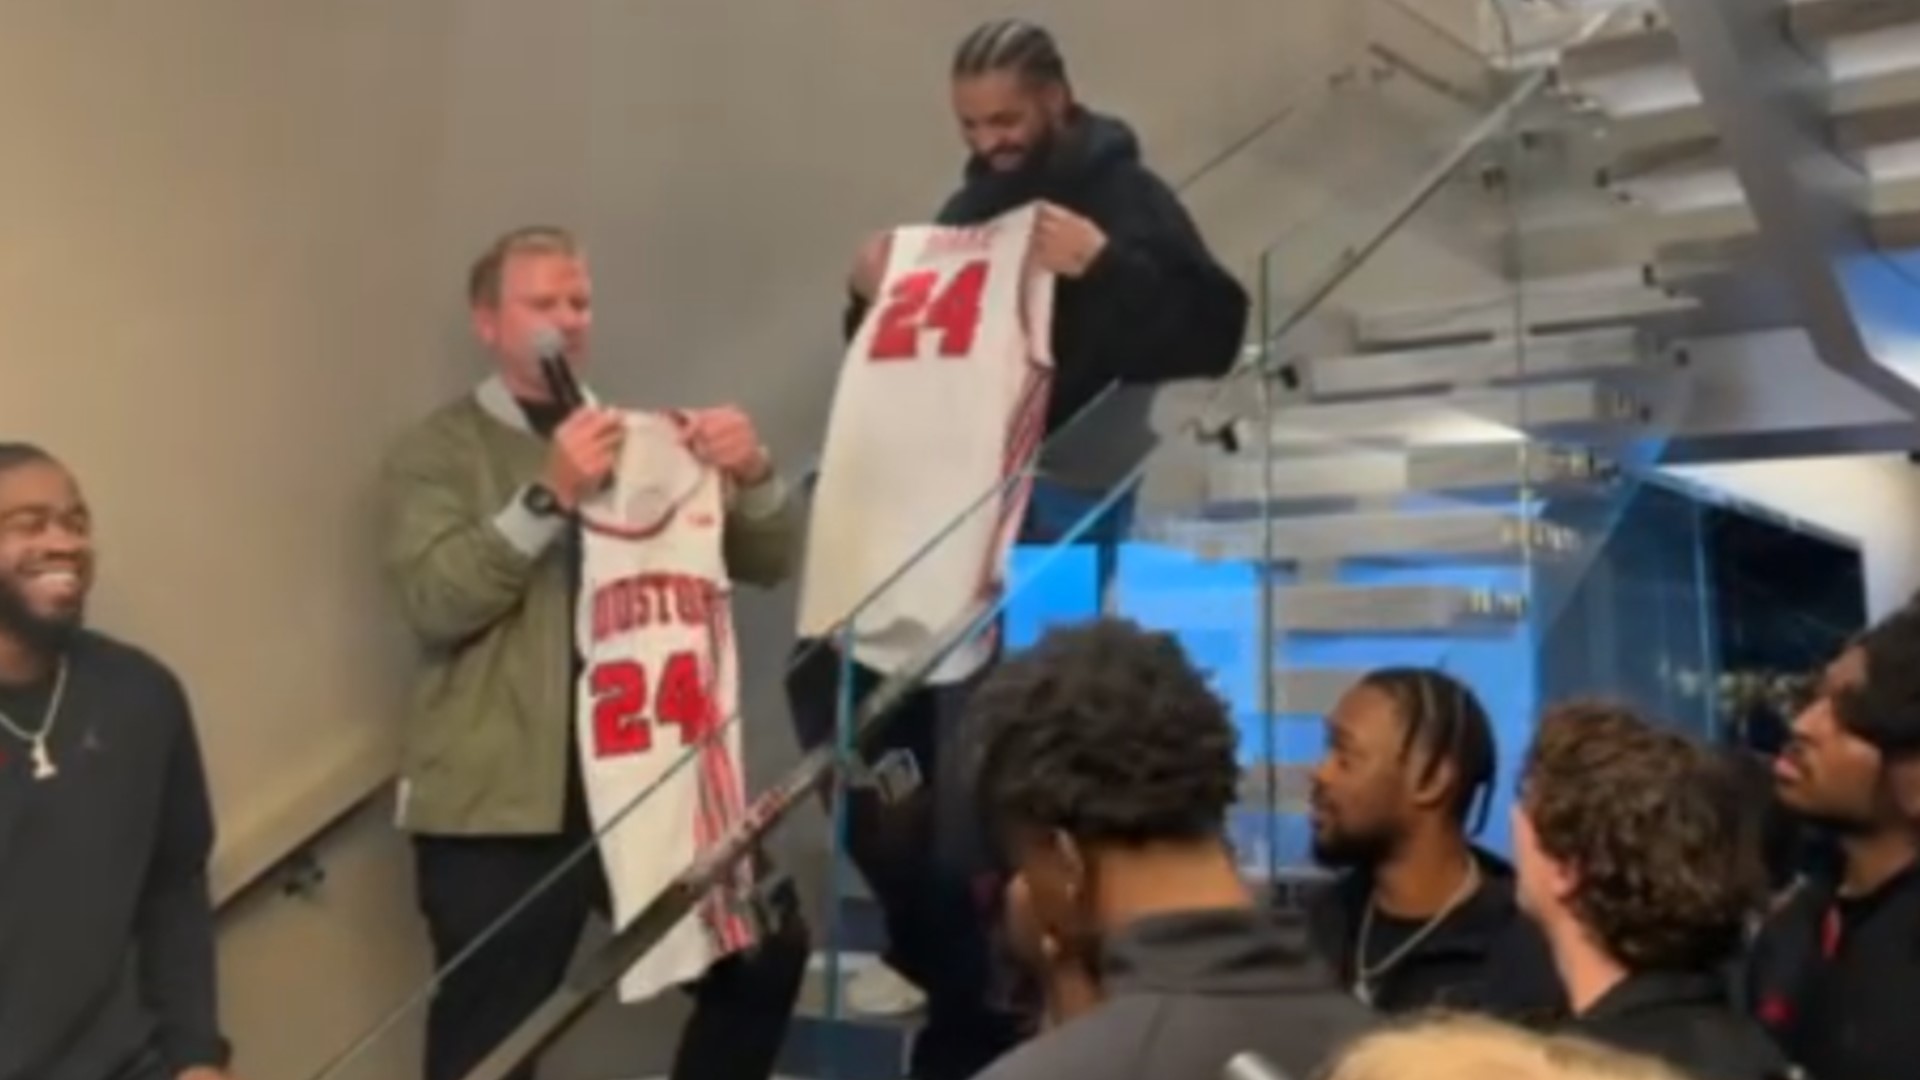 Drake was presented with a Coogs jersey with the number 24 on it, which Tilman Fertitta said "is going to be a big special year for UH."